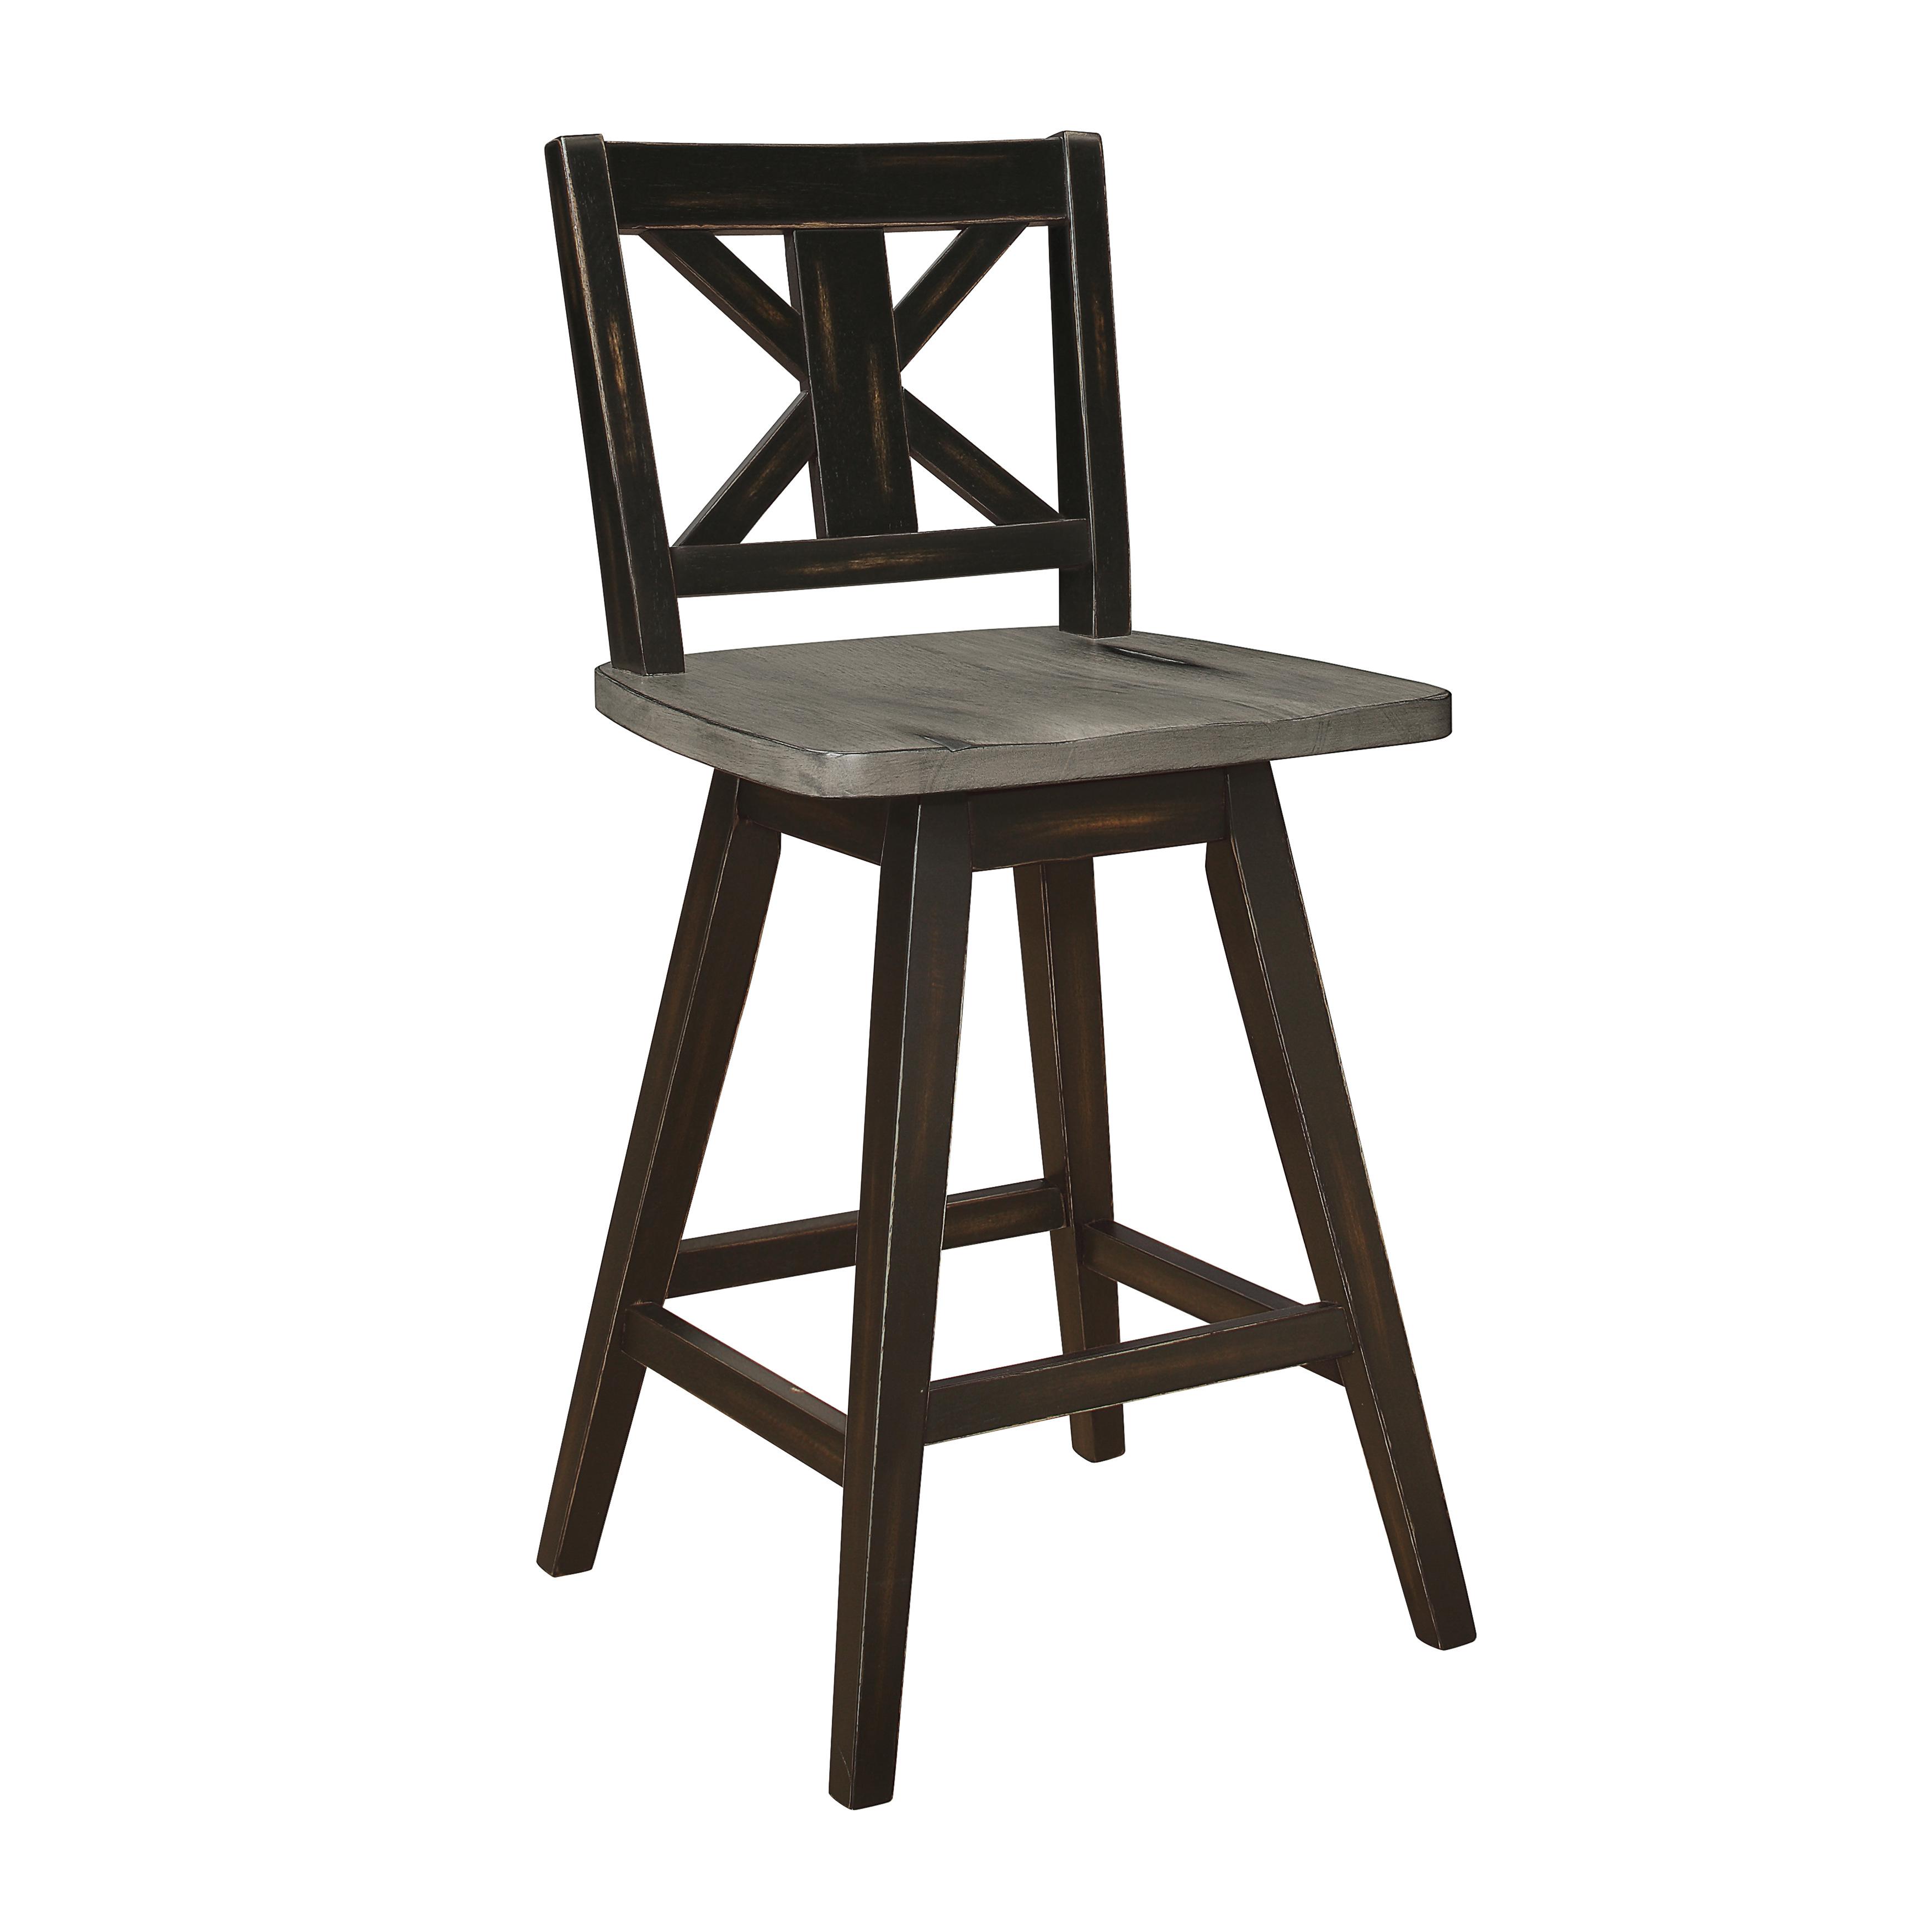 

    
Rustic Distressed Gray & Black Solid Wood 24" Counter Height Chair Set 2pcs Homelegance 5602-24BK Amsonia
